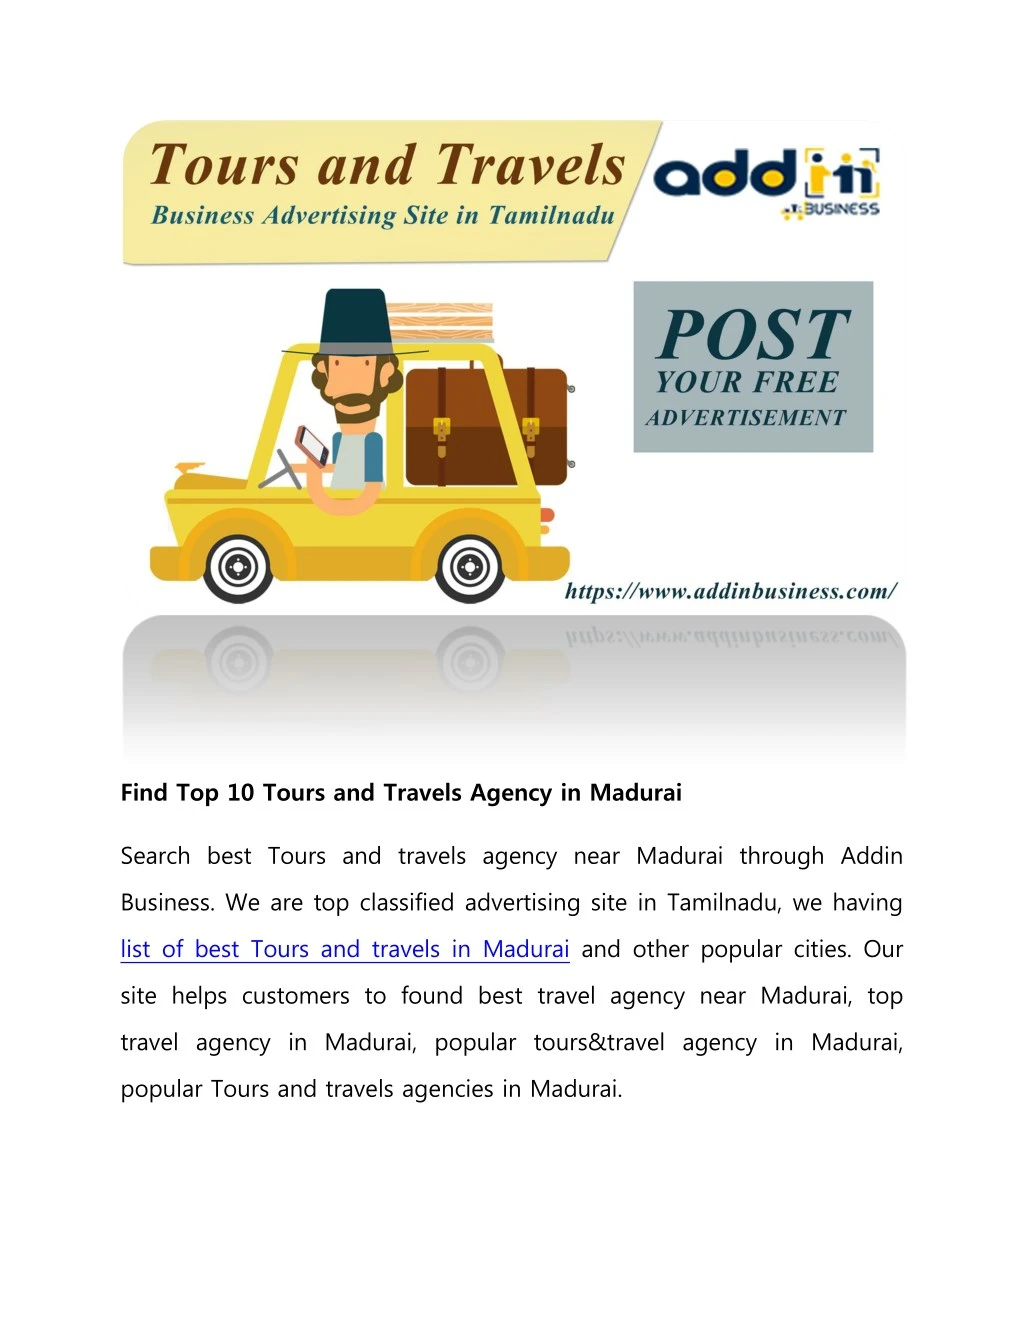 find top 10 tours and travels agency in madurai